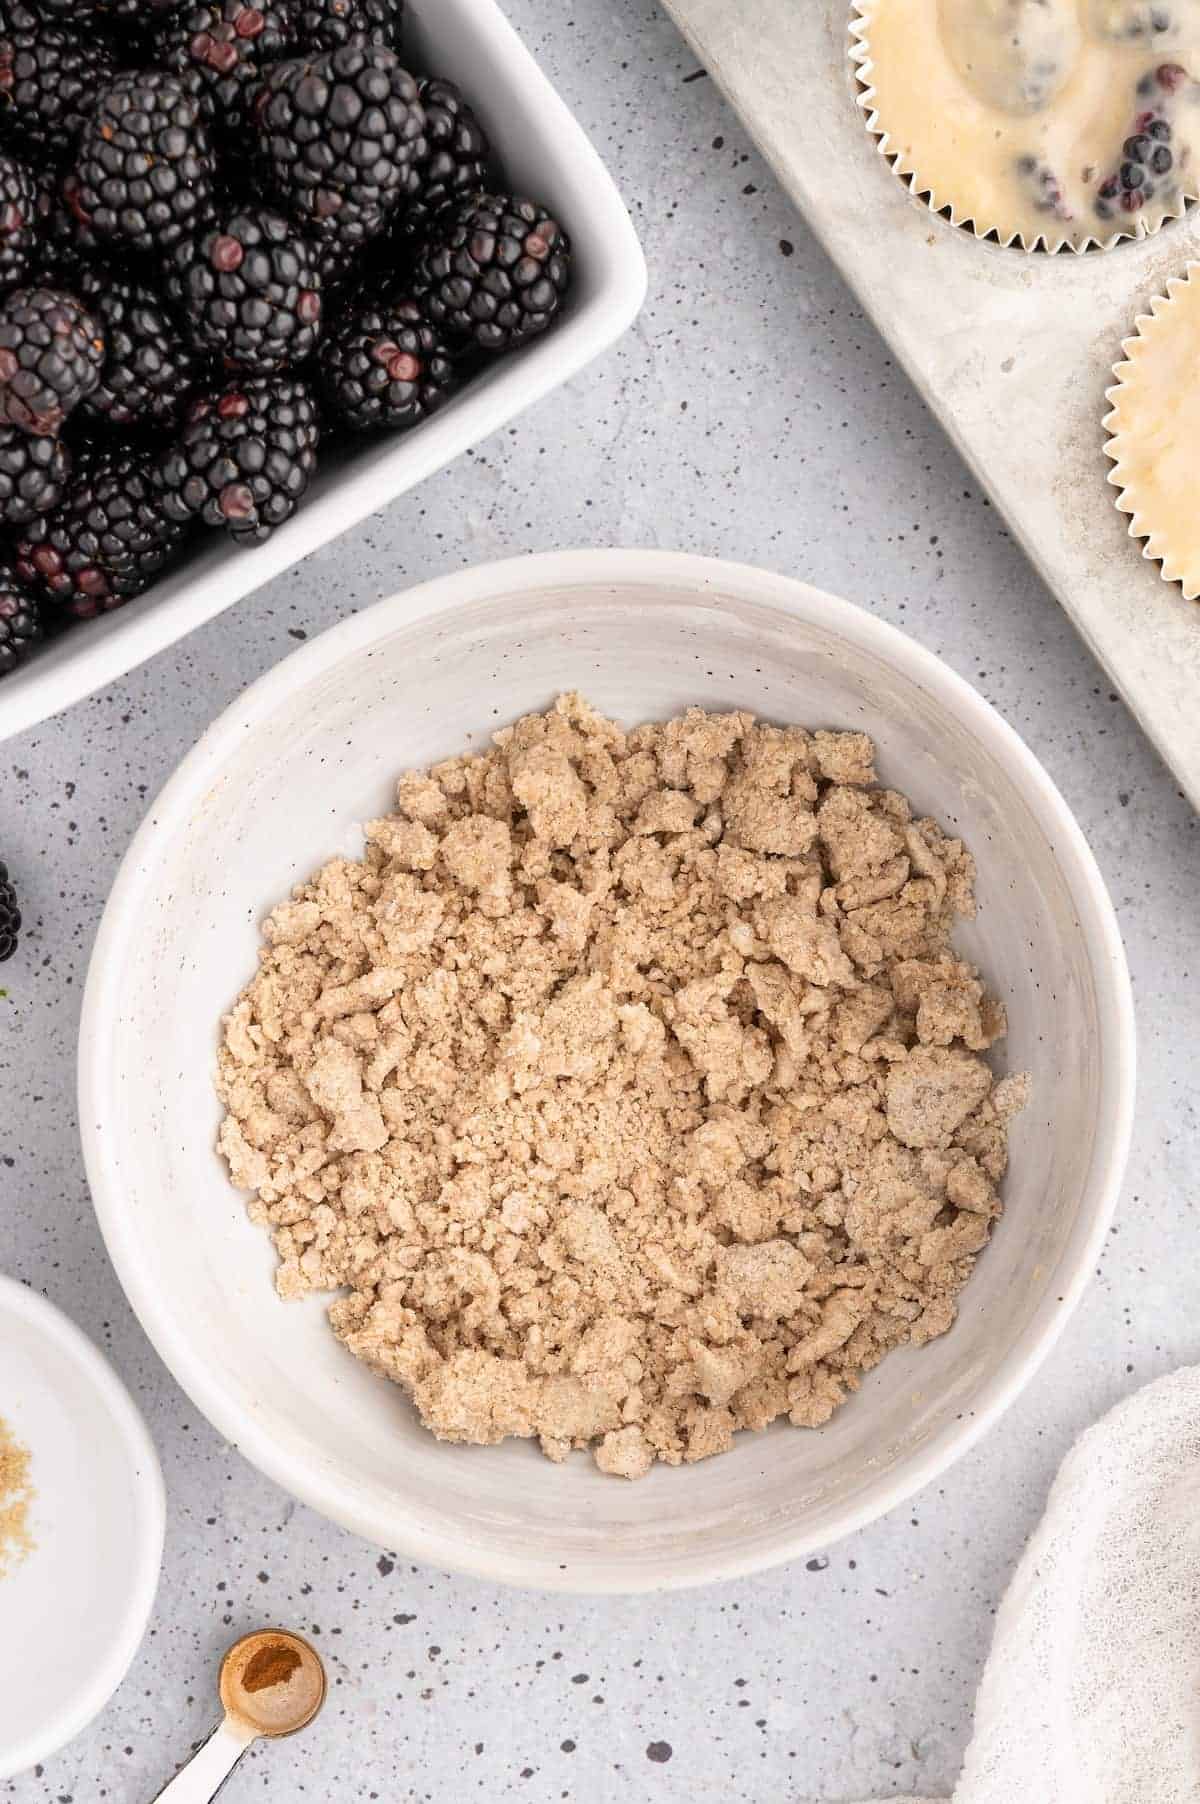 Crumb topping ingredients for blackberry muffins mixed together in a bowl.